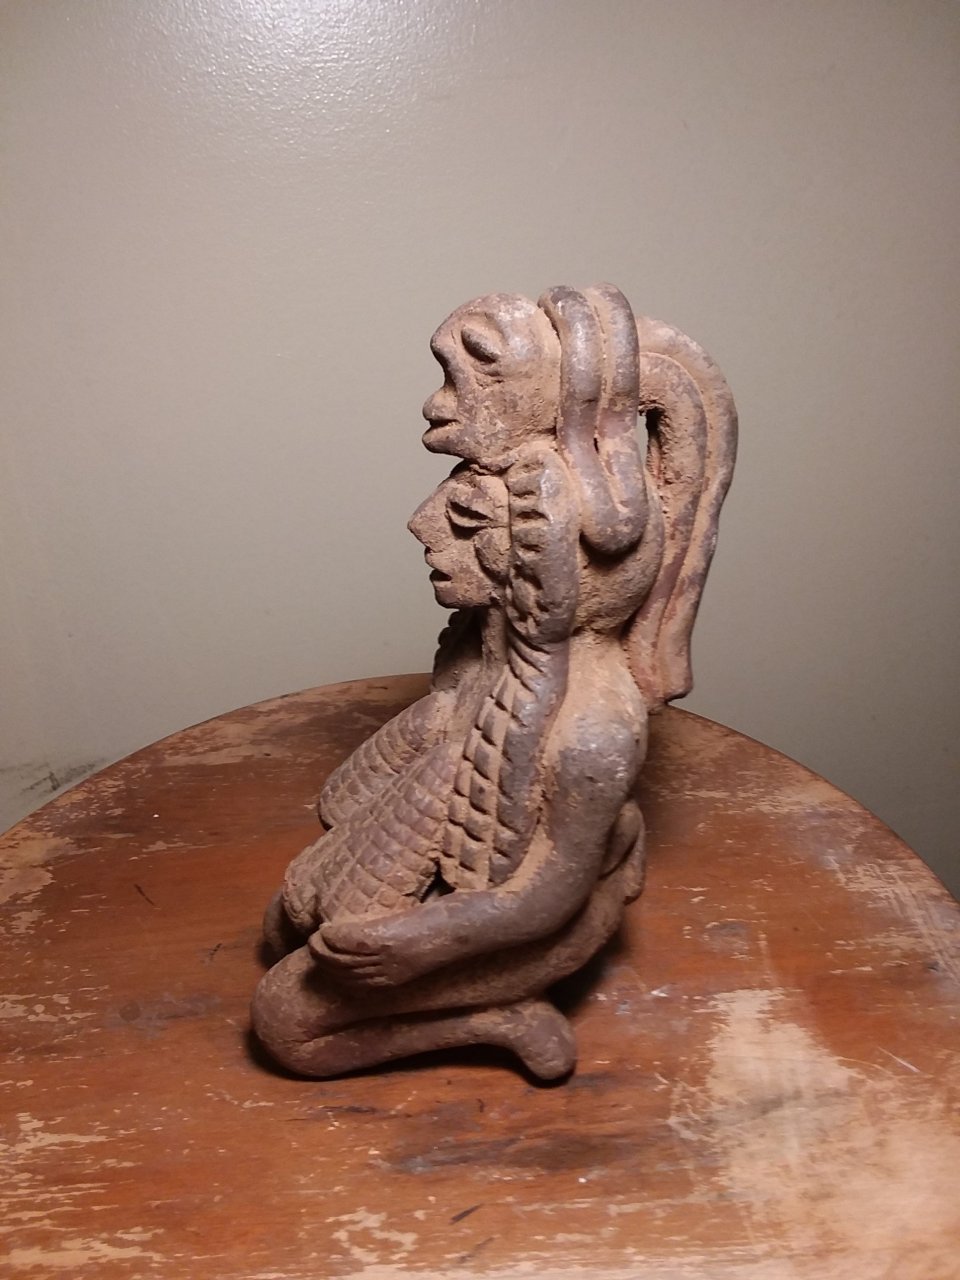 Aztec Maize Goddess, How Old, Made Of What, Can It Be Authentic